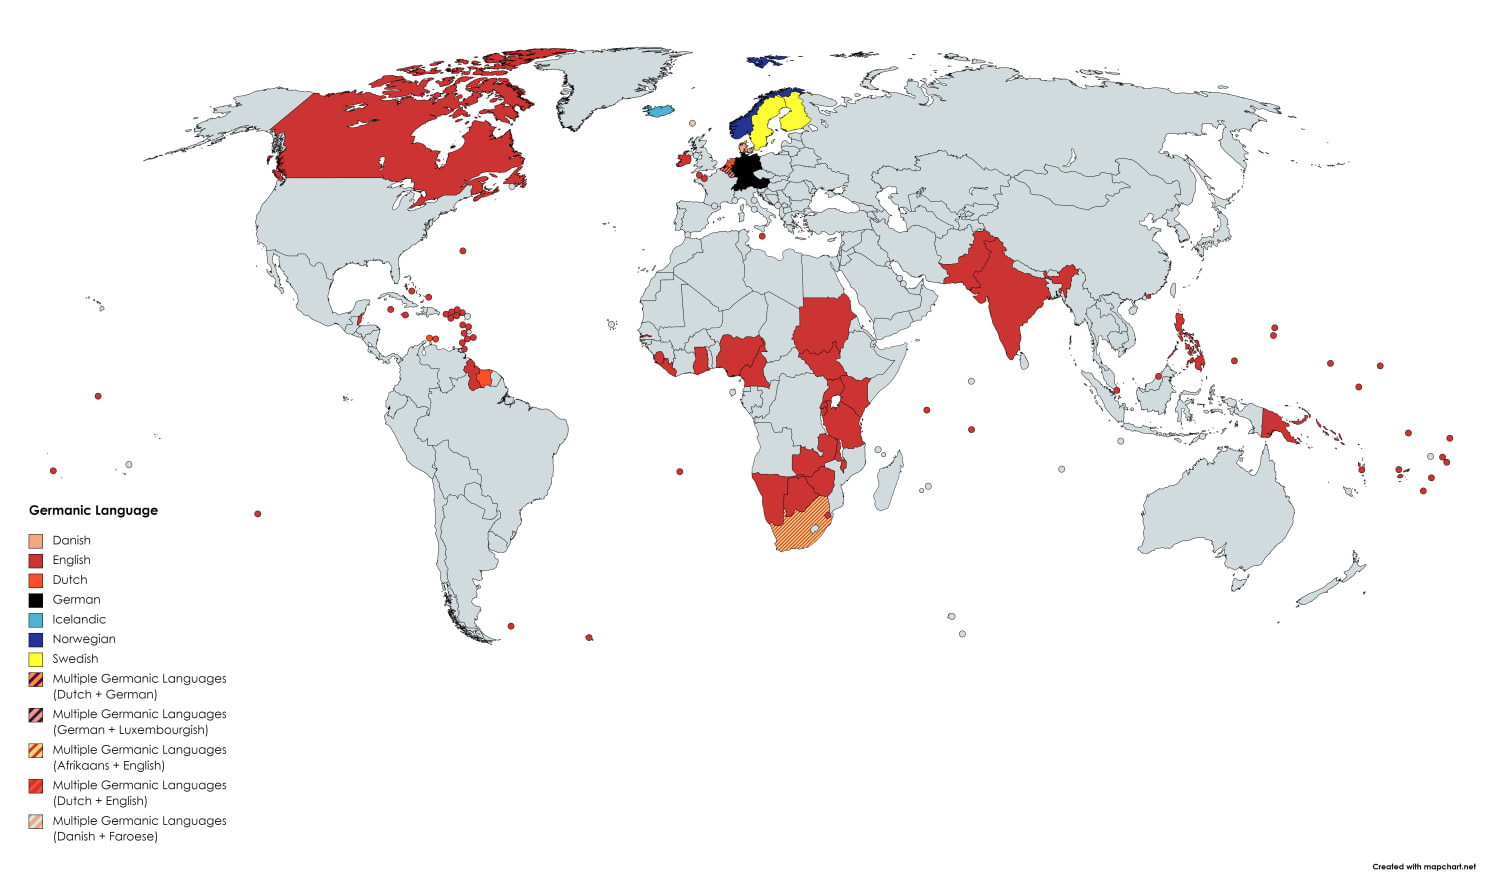 Countries with a Germanic language as an official language